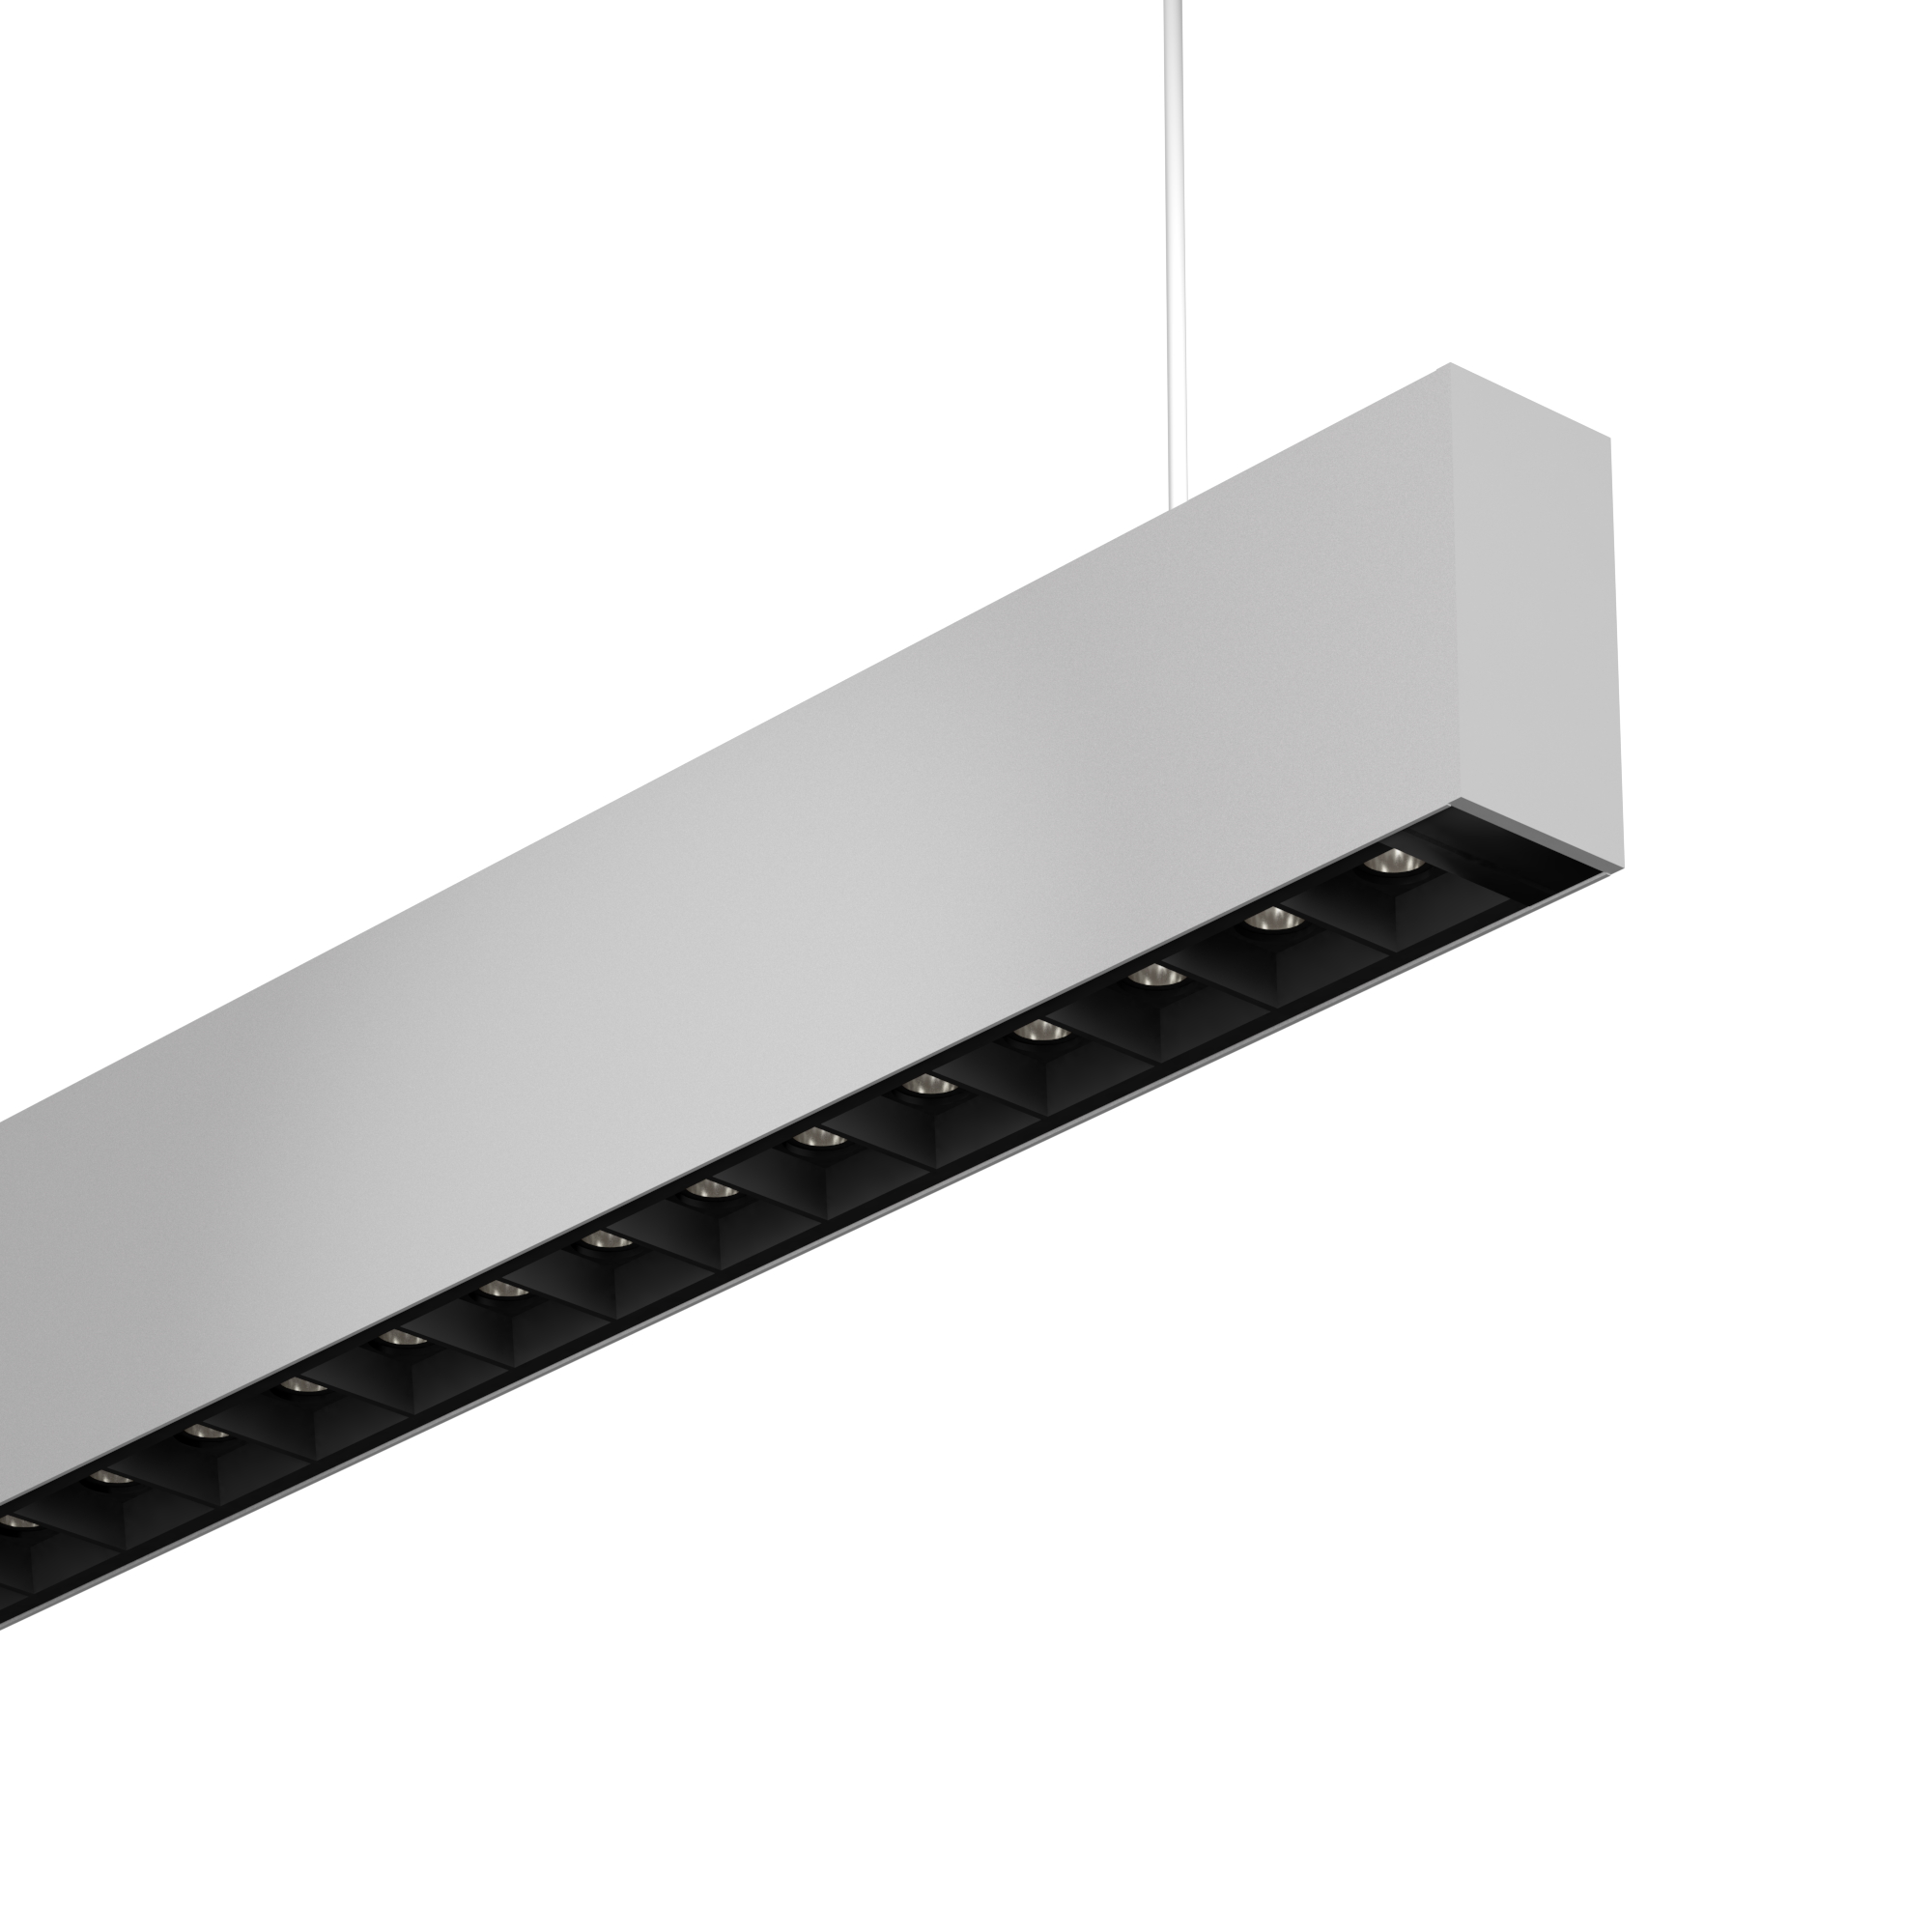 Low Glare Pendant linear with integral on-board Driver
MCO Linear Pendant is a 1.4” x 2.95” sized suspended linear providing low glare (UGR<19) illumination. MCO Linear Pendant is designed for suspension mounting with an integral, field serviceable, on-board driver. MCO LInear Pendant brings SmartBeam® capabilities up to a powerful 2000 lumens per foot combined direct and indirect. It’s small size designed to compliment architectural space. MCO Linear Pendant is fully field serviceable and can be supplied in continuous runs and a variety of visually appealing shapes.
Typical Applications

 	Offices and co-working spaces
 	Schools, colleges and universities
 	Retail spaces